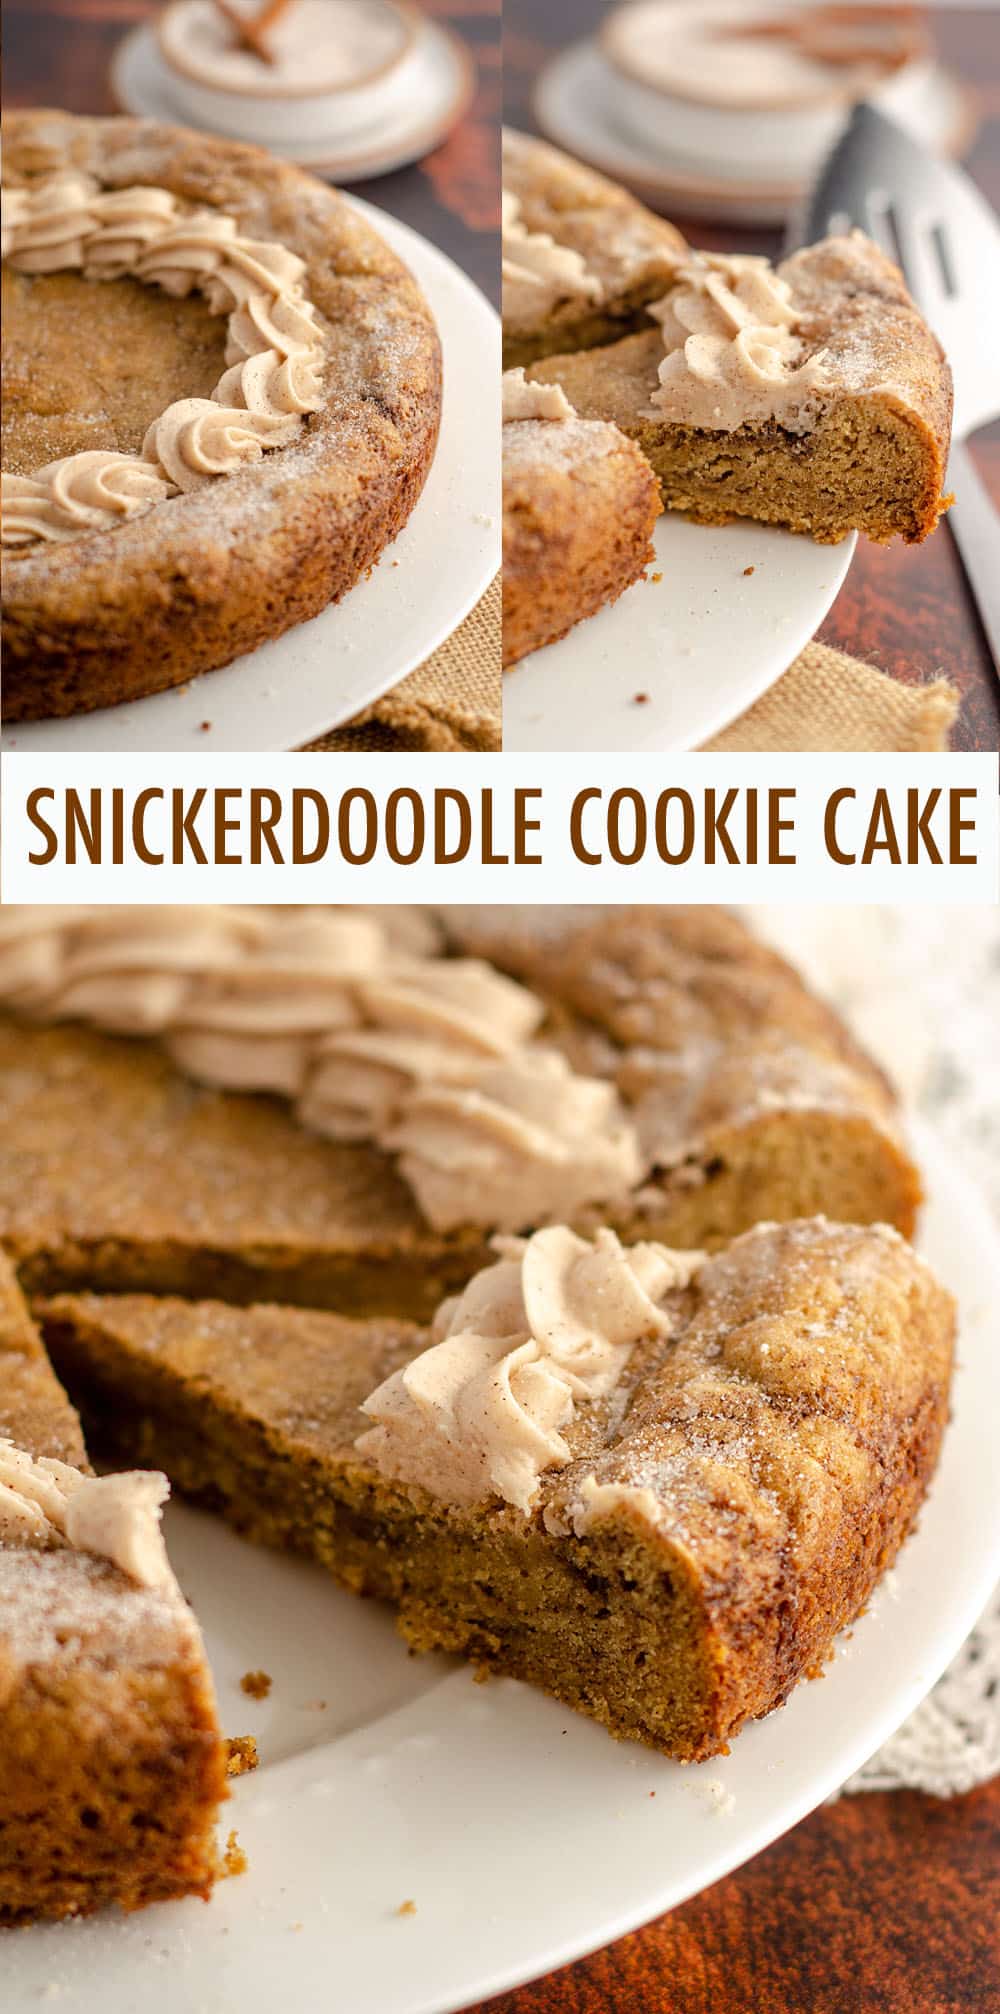 A simple brown sugar cookie base swirled with cinnamon ribbons and topped with a creamy, spiced snickerdoodle buttercream. Whip up one giant snickerdoodle cookie for your next celebration! via @frshaprilflours